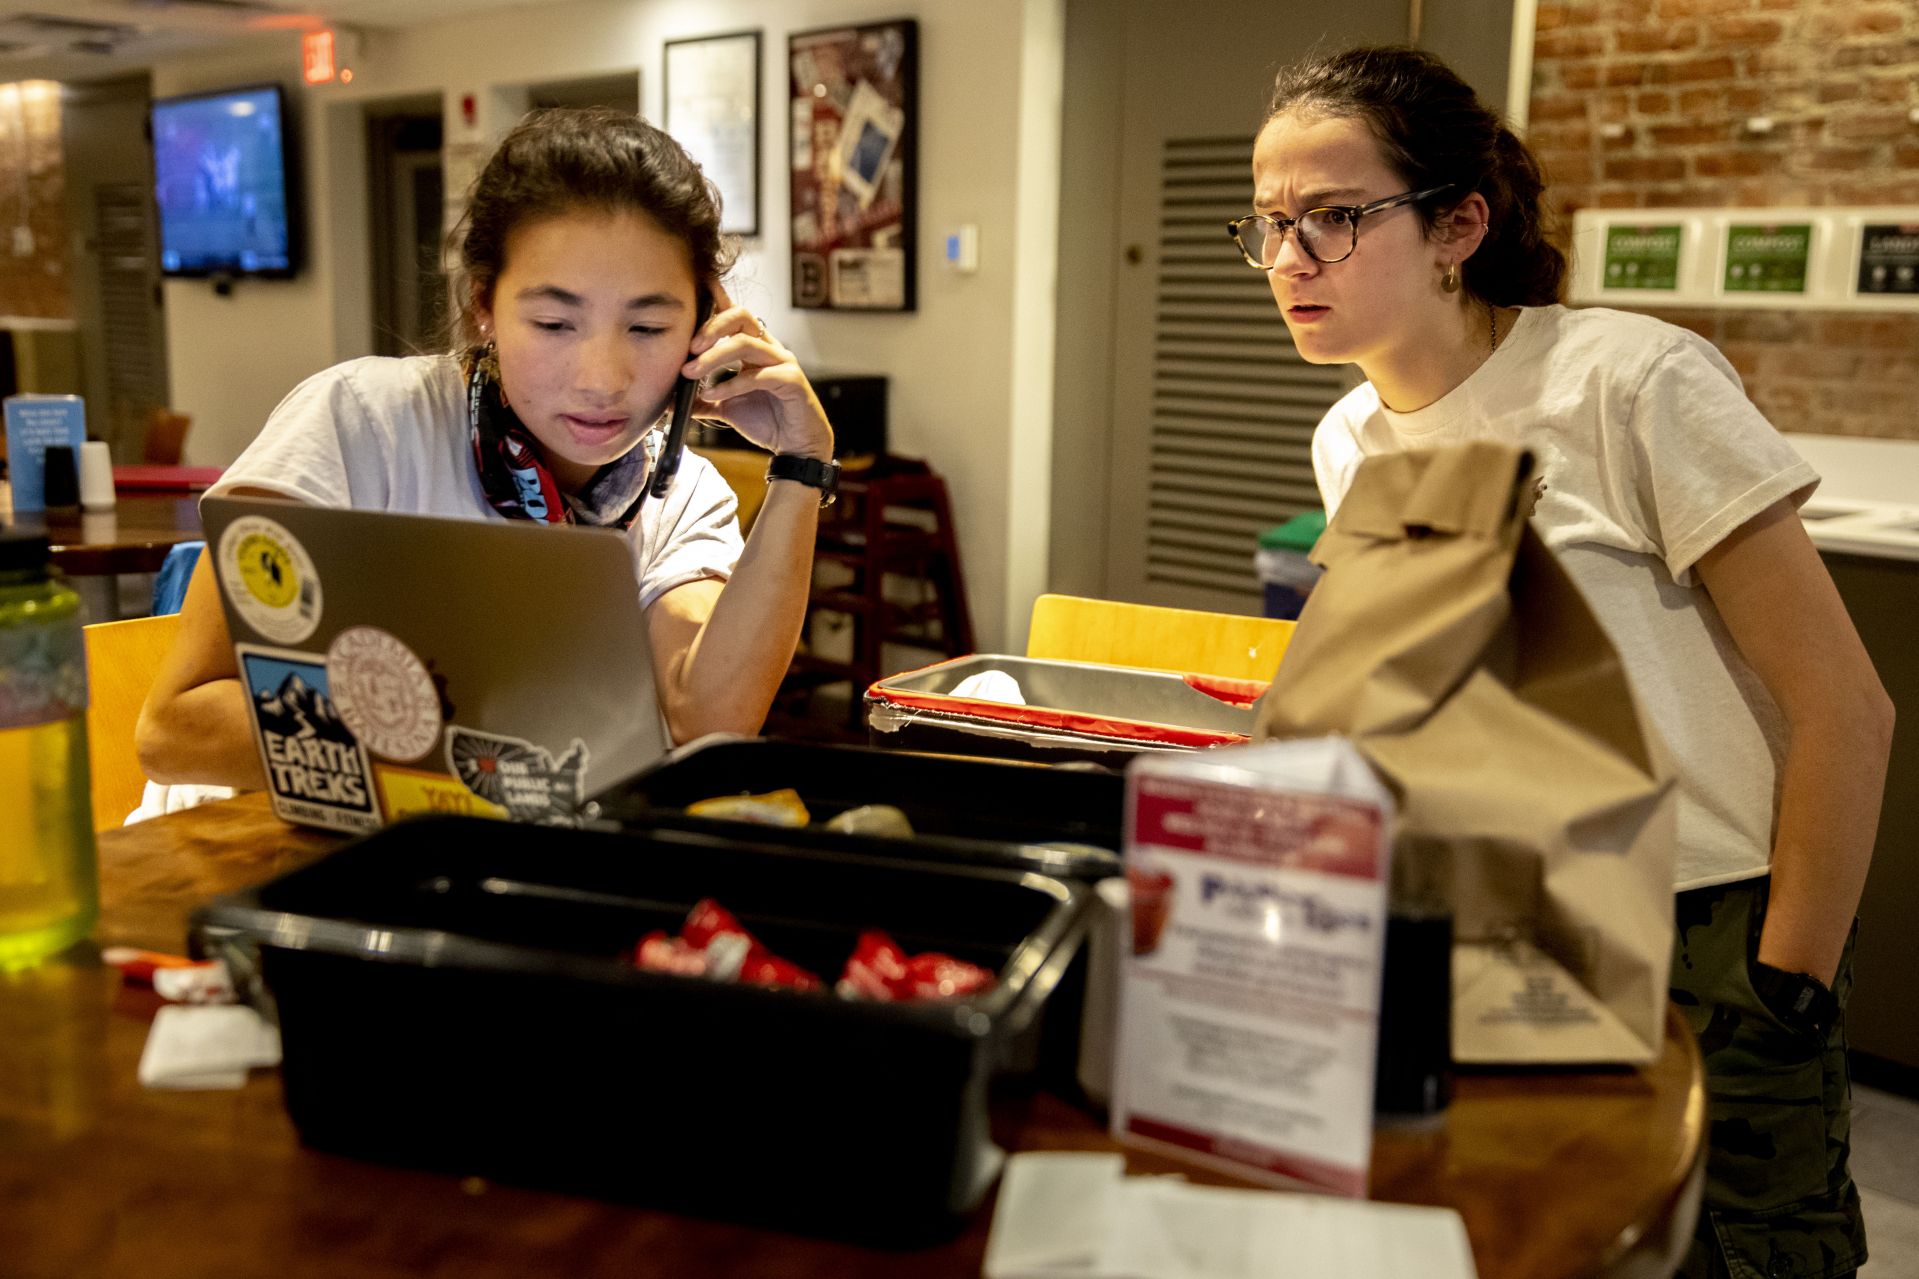 Bates Den Deliver Service in operation between 9-10 p.m. on Tuesday, Nov. 19, 2019. Serving as the CEO this year is Grace Warder '20 of NYC, and taking the orders and making the deliveries tonight are Olivia Kranefuss '22 of Madison, N.J.,in the corduroy shirt and Elly Beckerman '22 of Washington, D.C., in glasses. All three women are environmental studies majors. Roman Hudgins of Dining Services is shown handing over an order to Kranefuss who bikes to her fist delivery at Parker, passing through the Library Quad, both on the Quad and the Library Well. Beckerman makes a delivery to Frye Street and bikes across the Historic Quad to get there. And Harley Rinehart, in gray shirt and garnet hat takes the order from Kranefuss after she waits in line to place it.